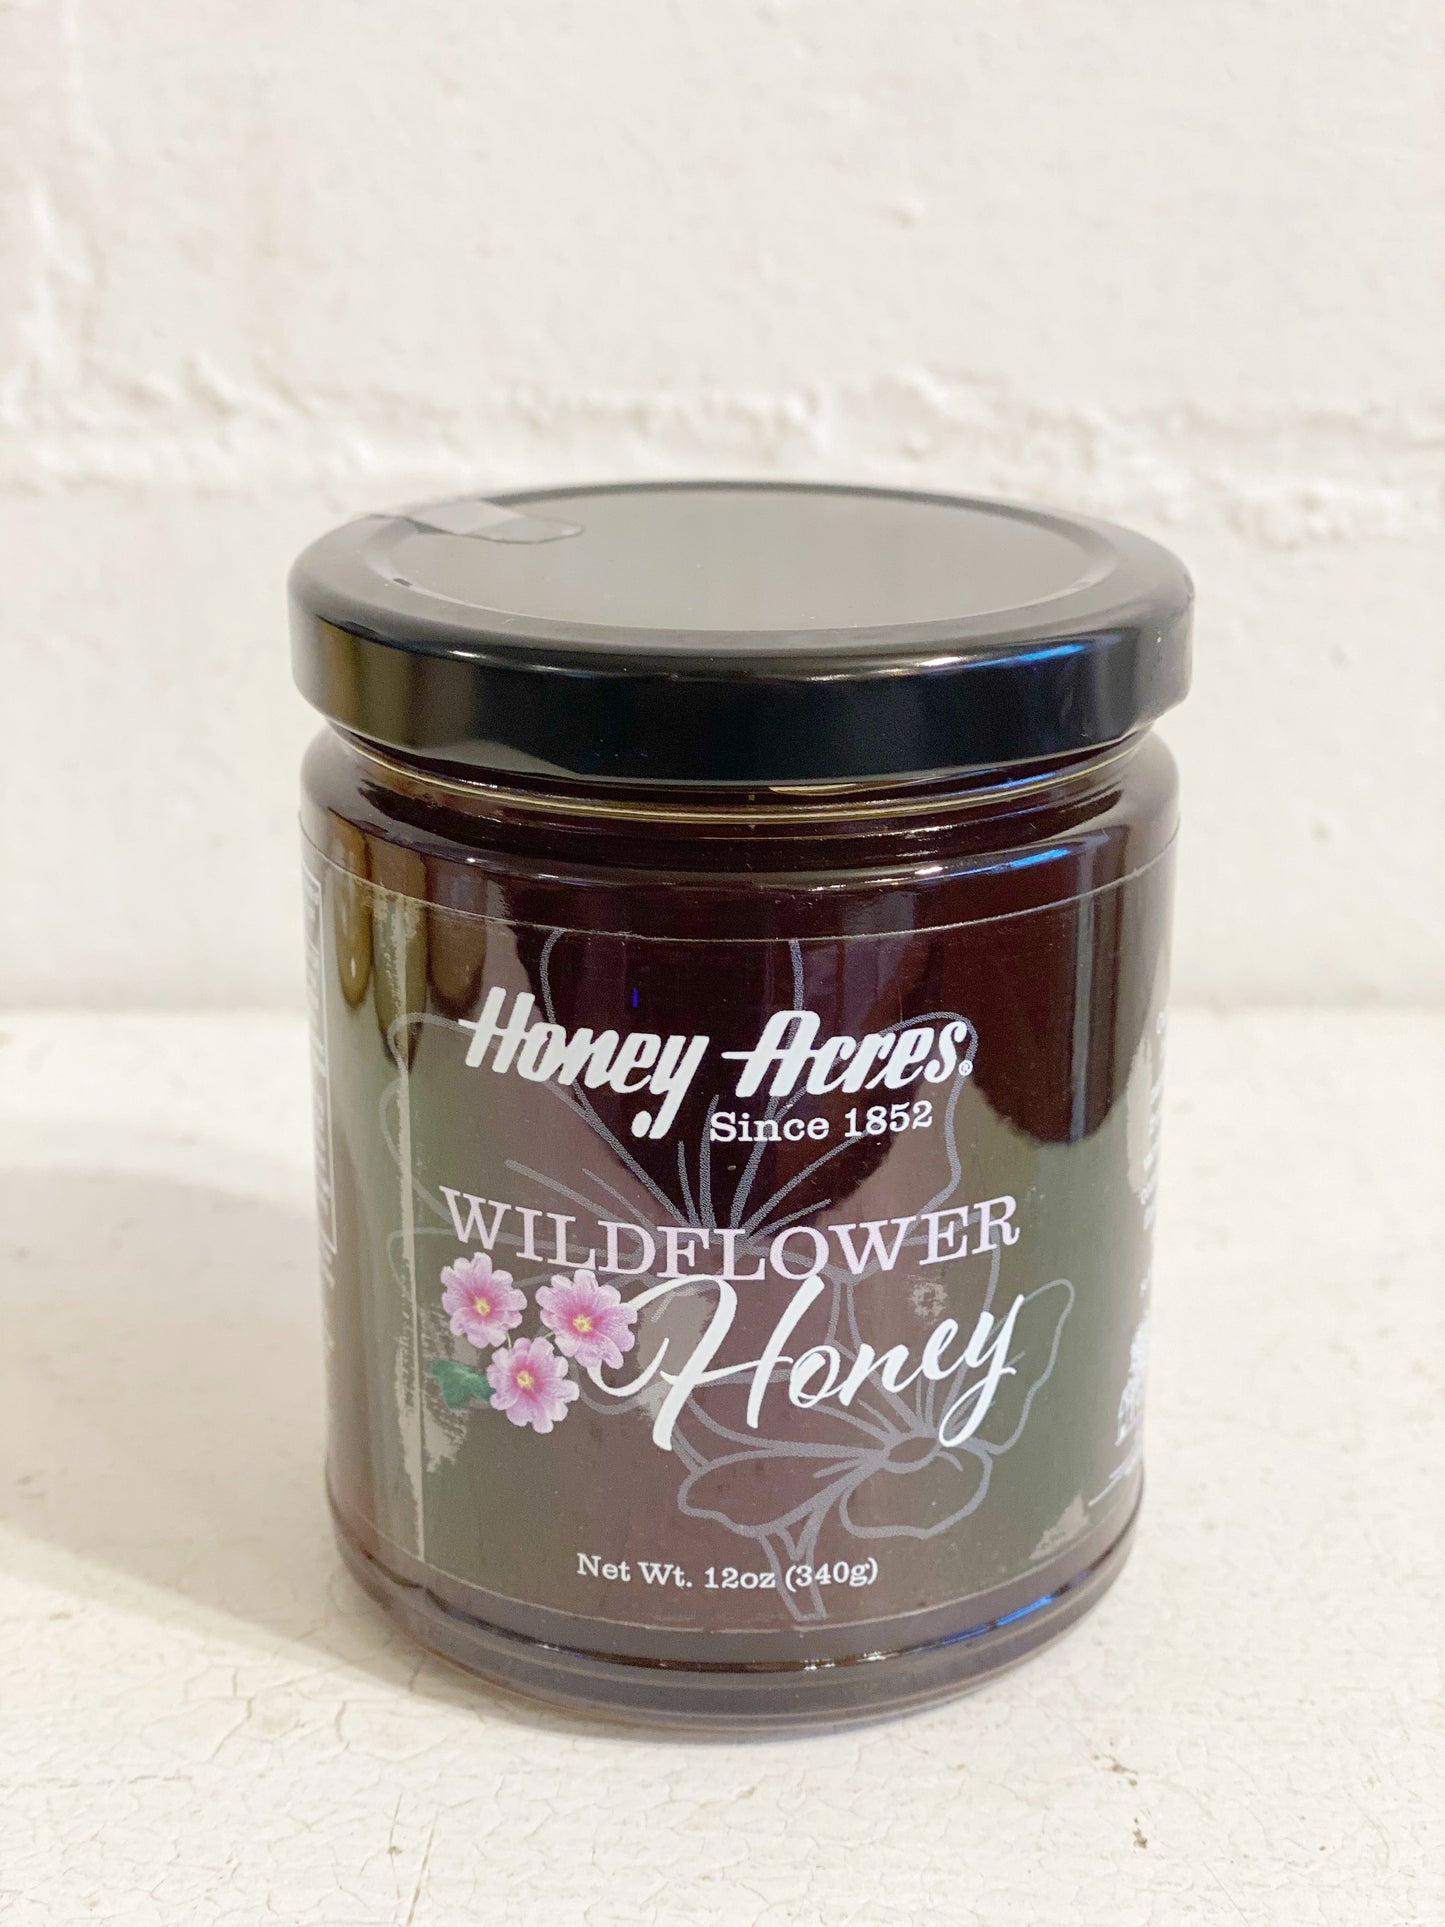 Honey Acres in LARGE Glass Jar